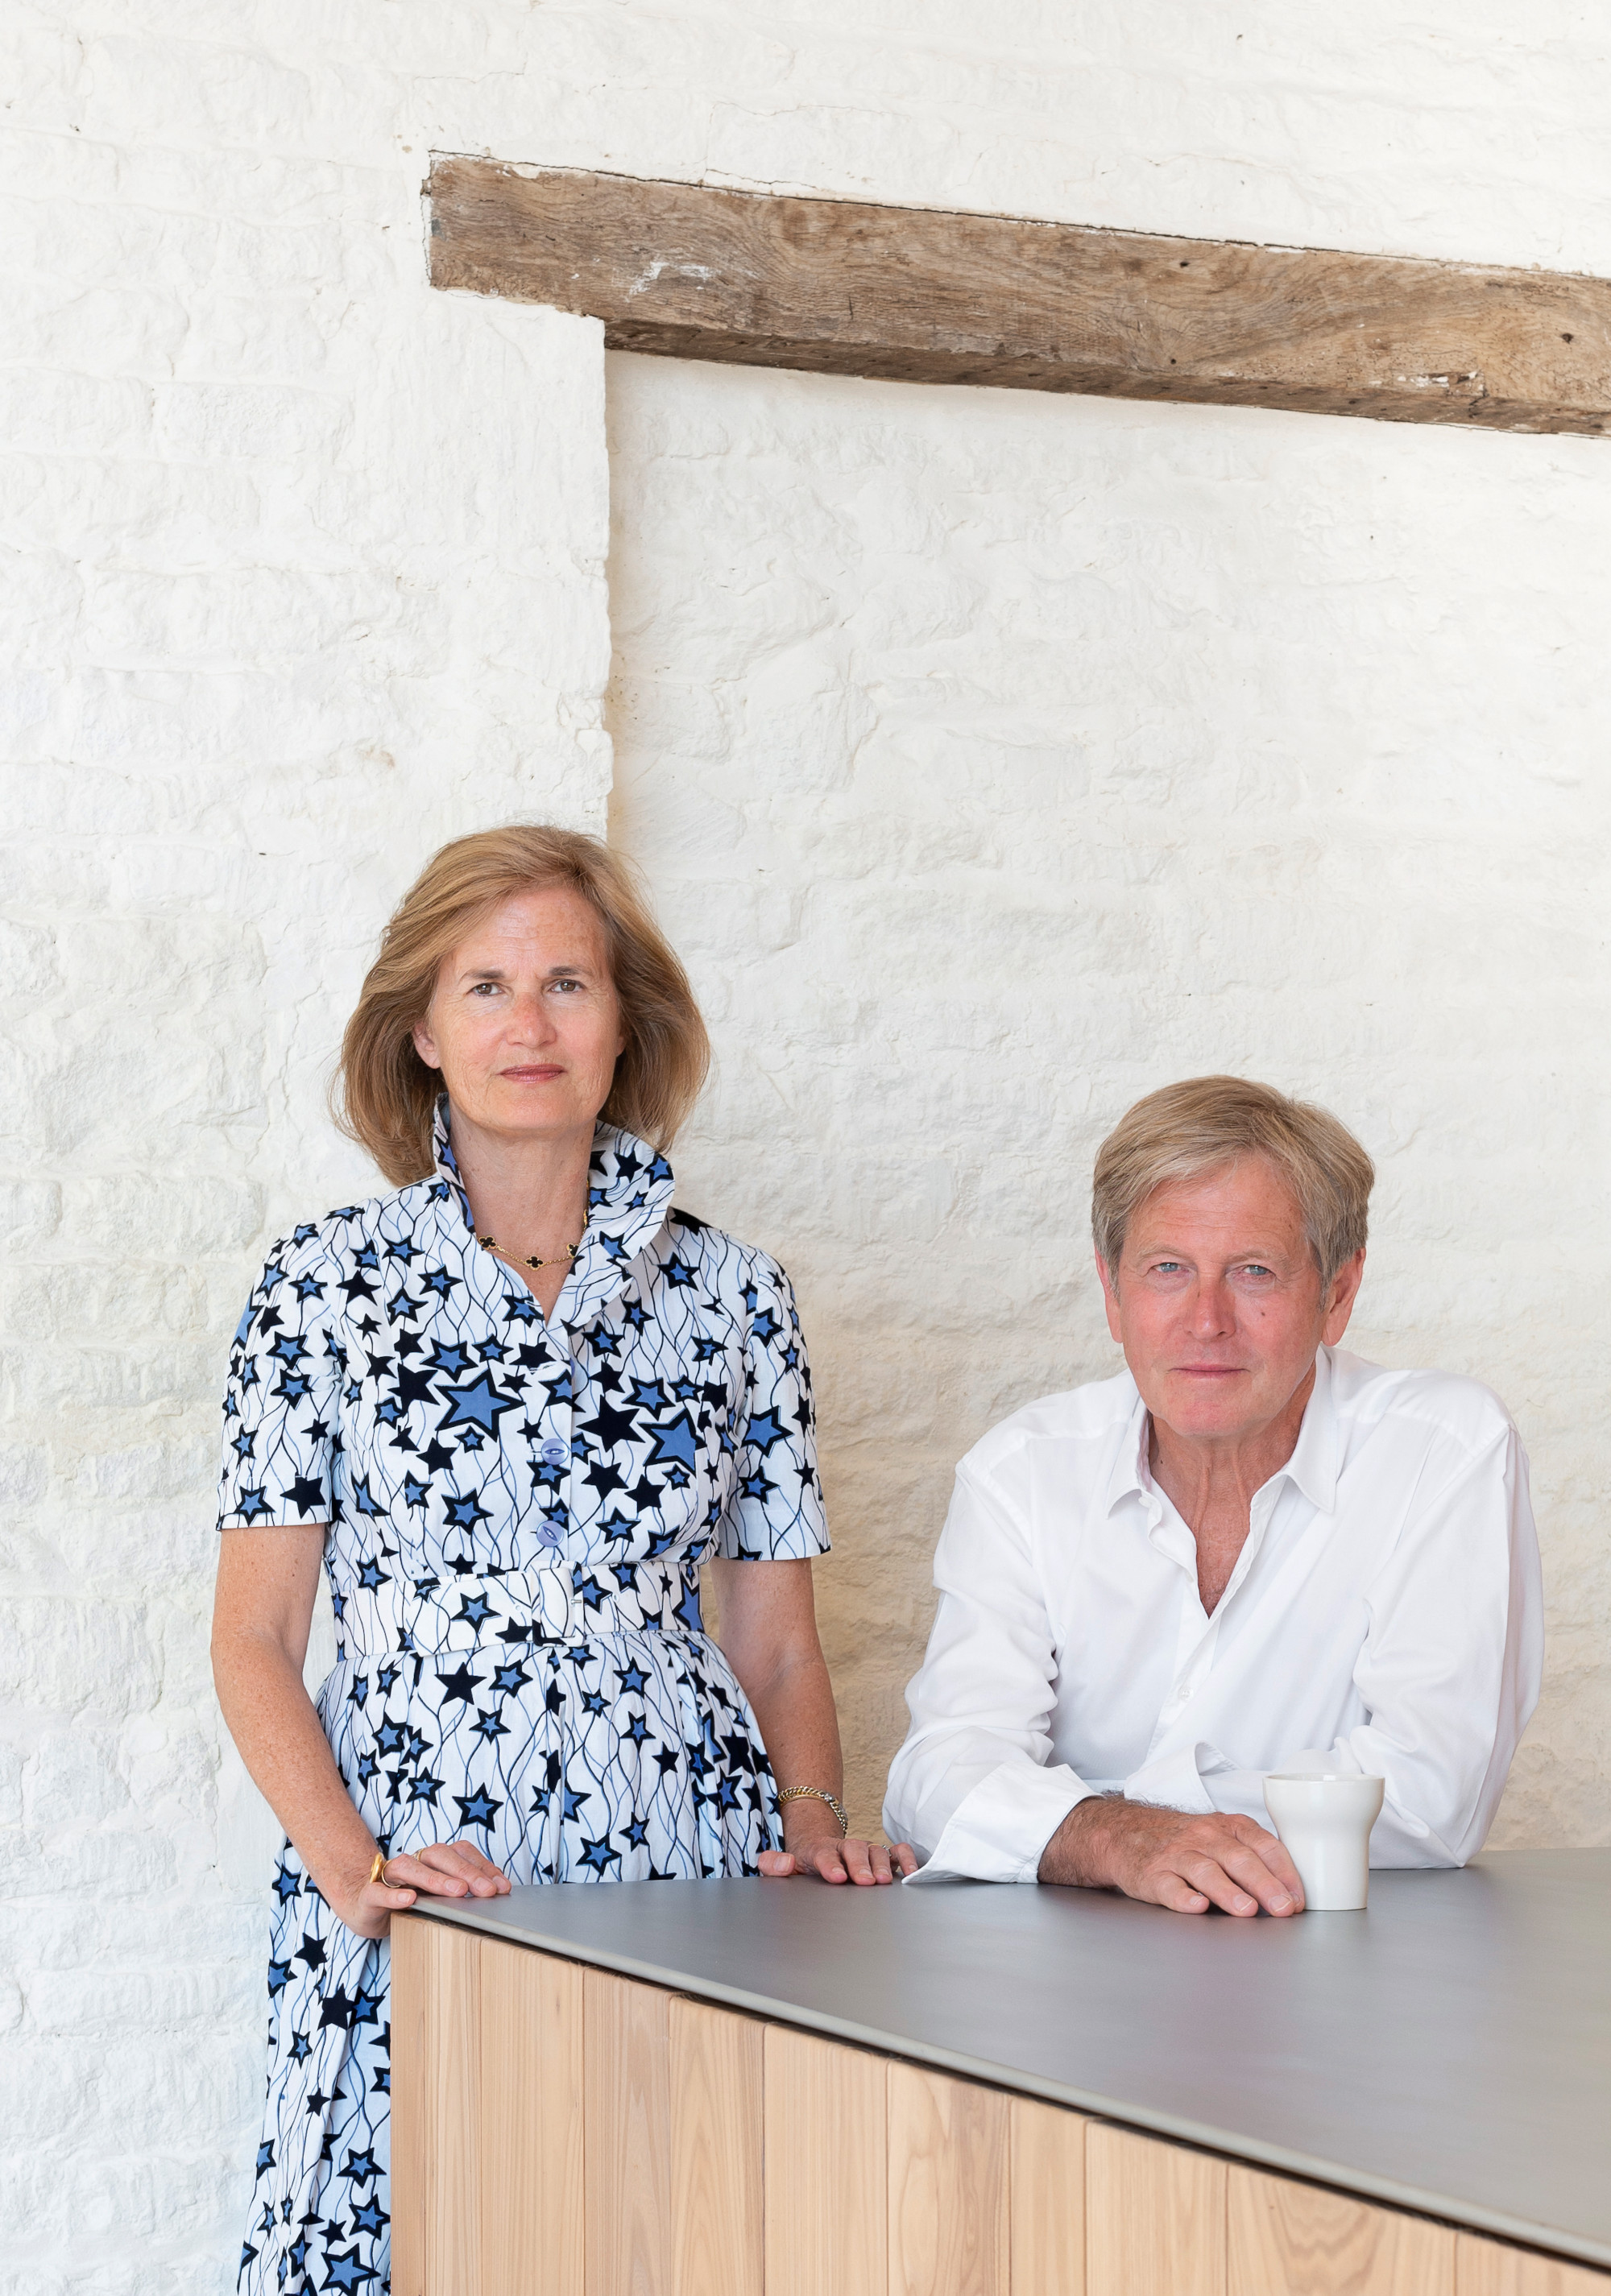 Catherine and John Pawson. All photographs by Gilbert McCarragher 